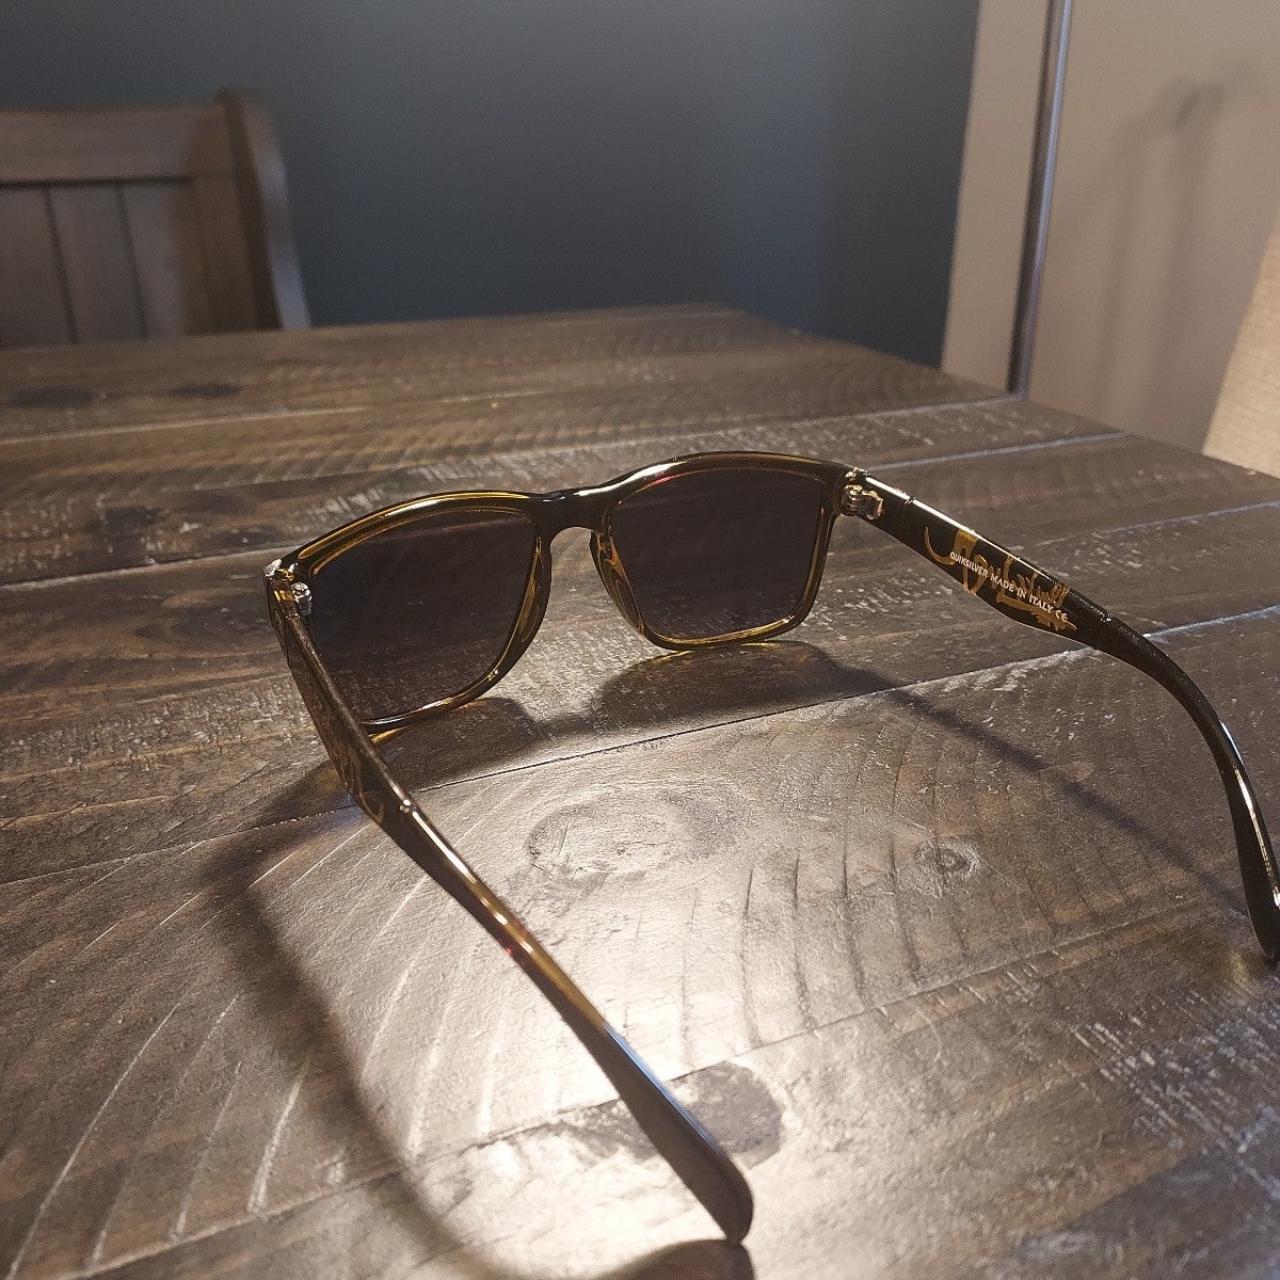 Quiksilver Men's Brown and Gold Sunglasses (4)